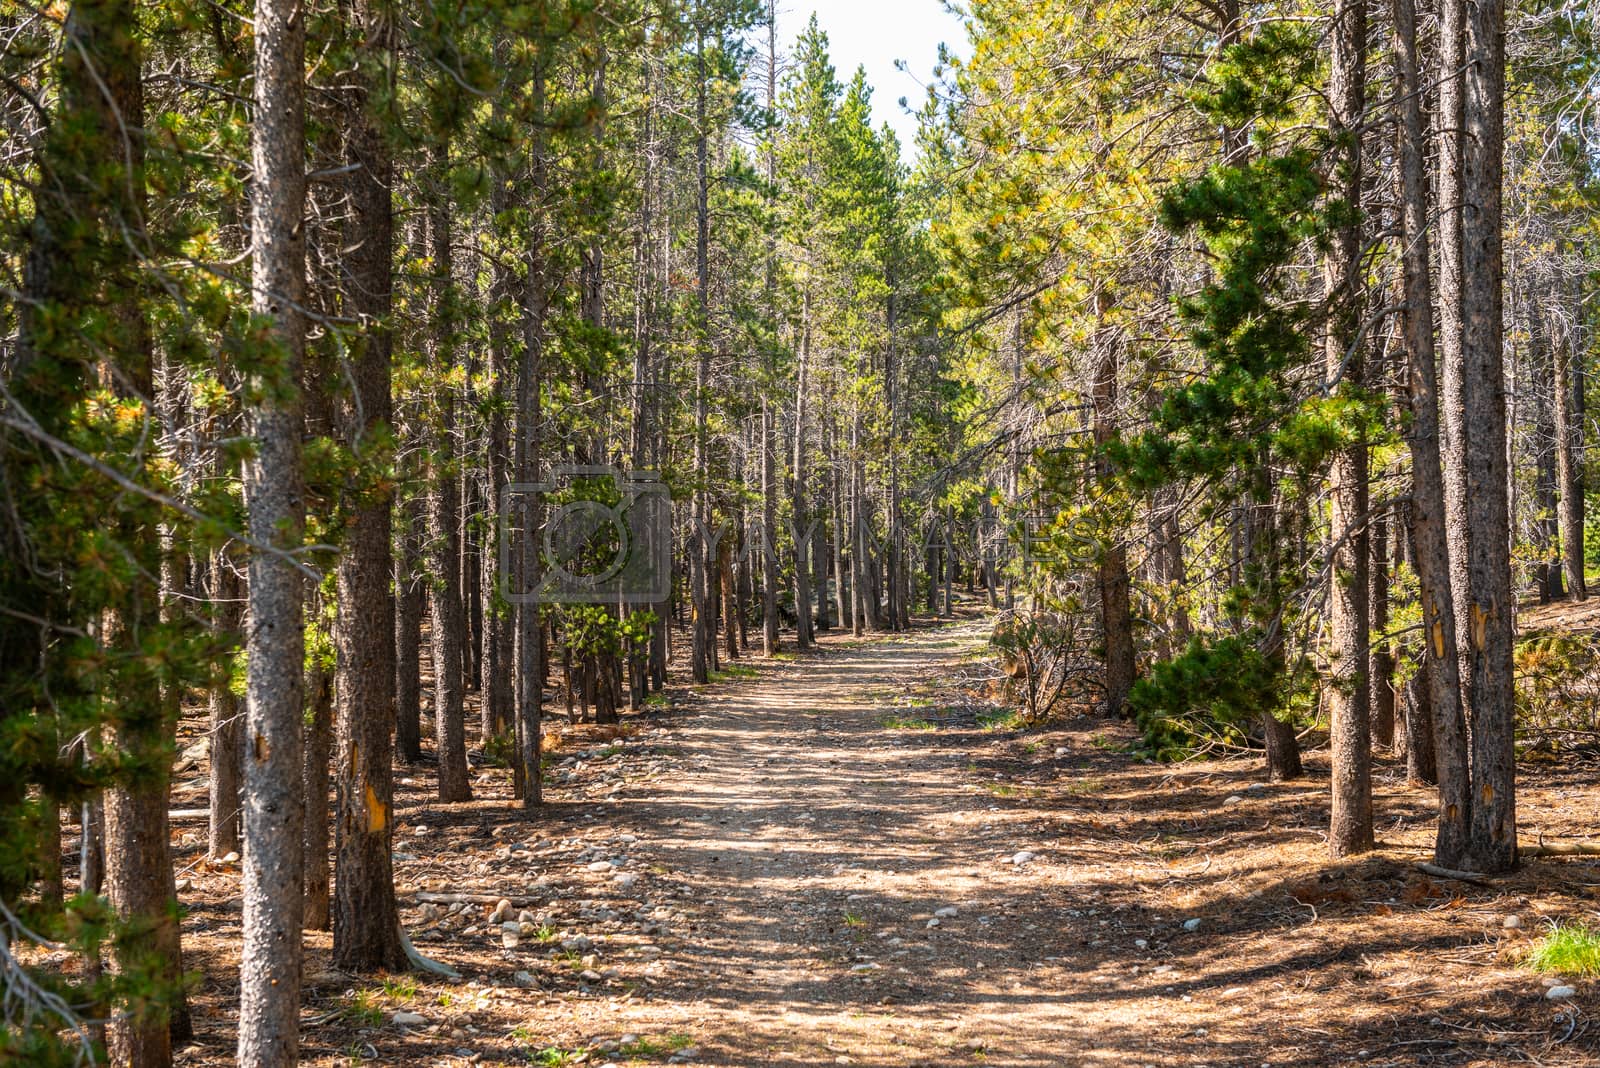 Royalty free image of Path through pine trees in Rocky Mountain National Park, CO by Njean